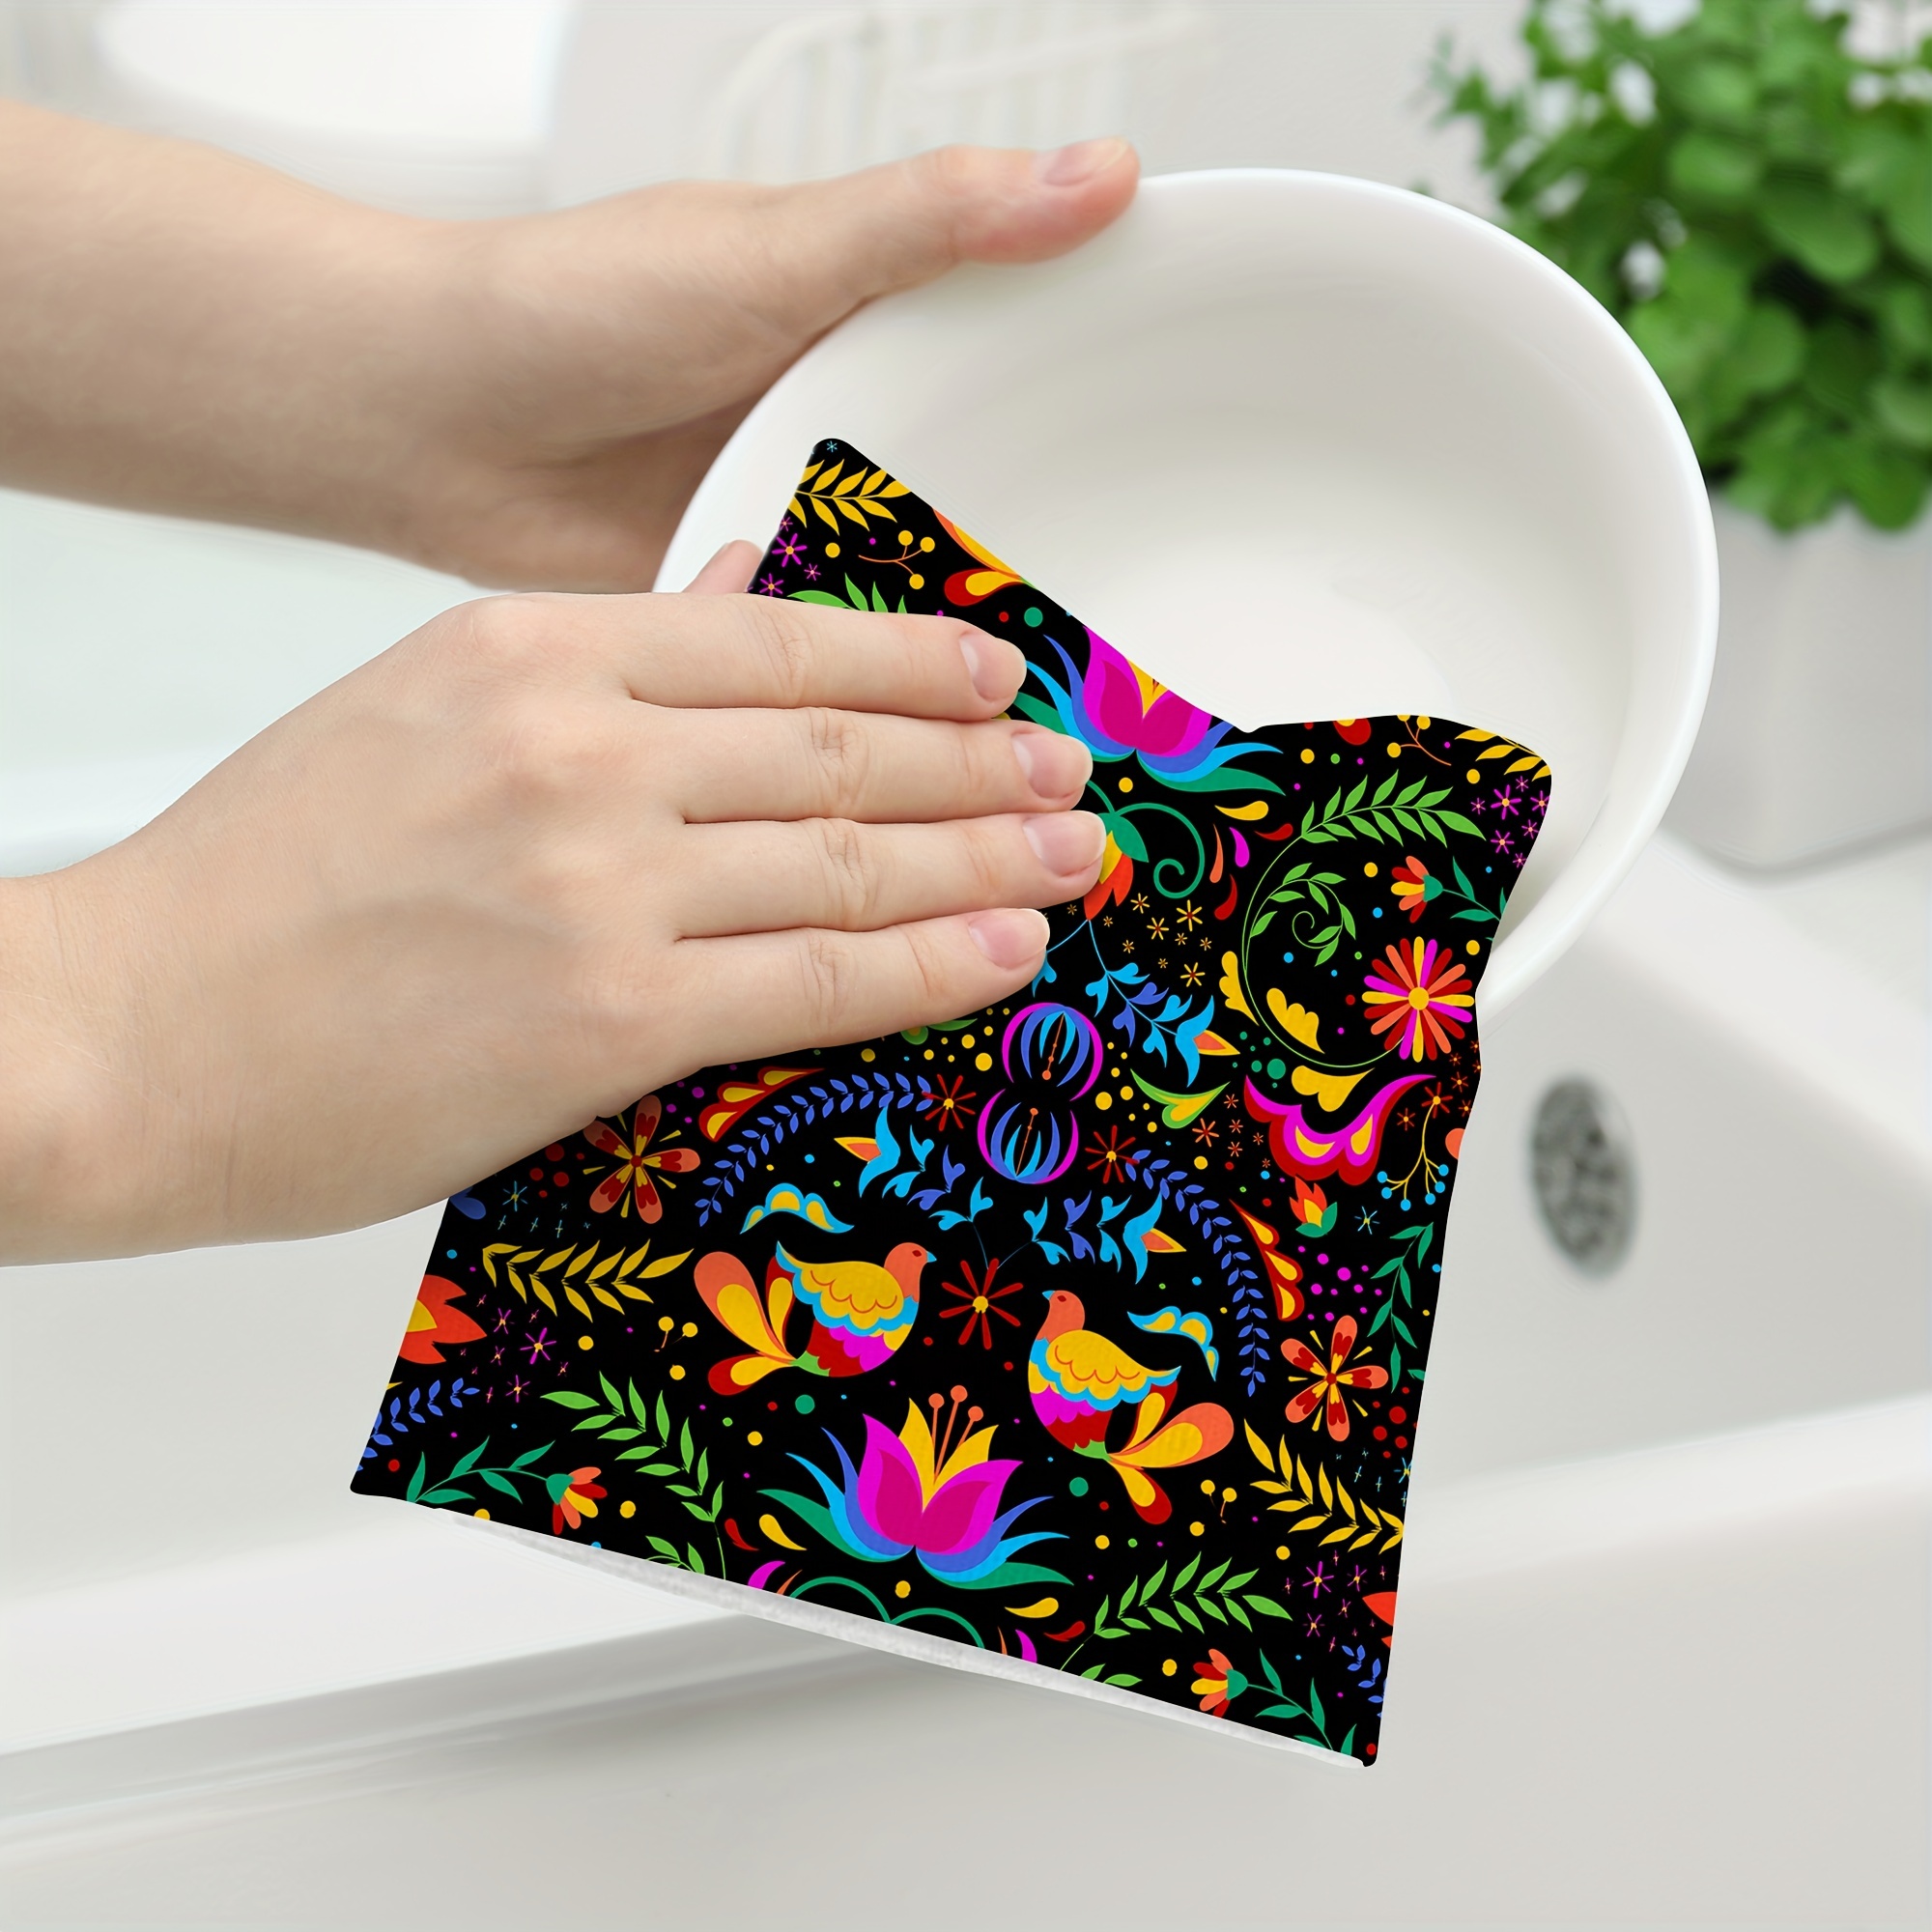 Hand Towels, Kitchen Square Dish Cloths, Microfiber Colorful